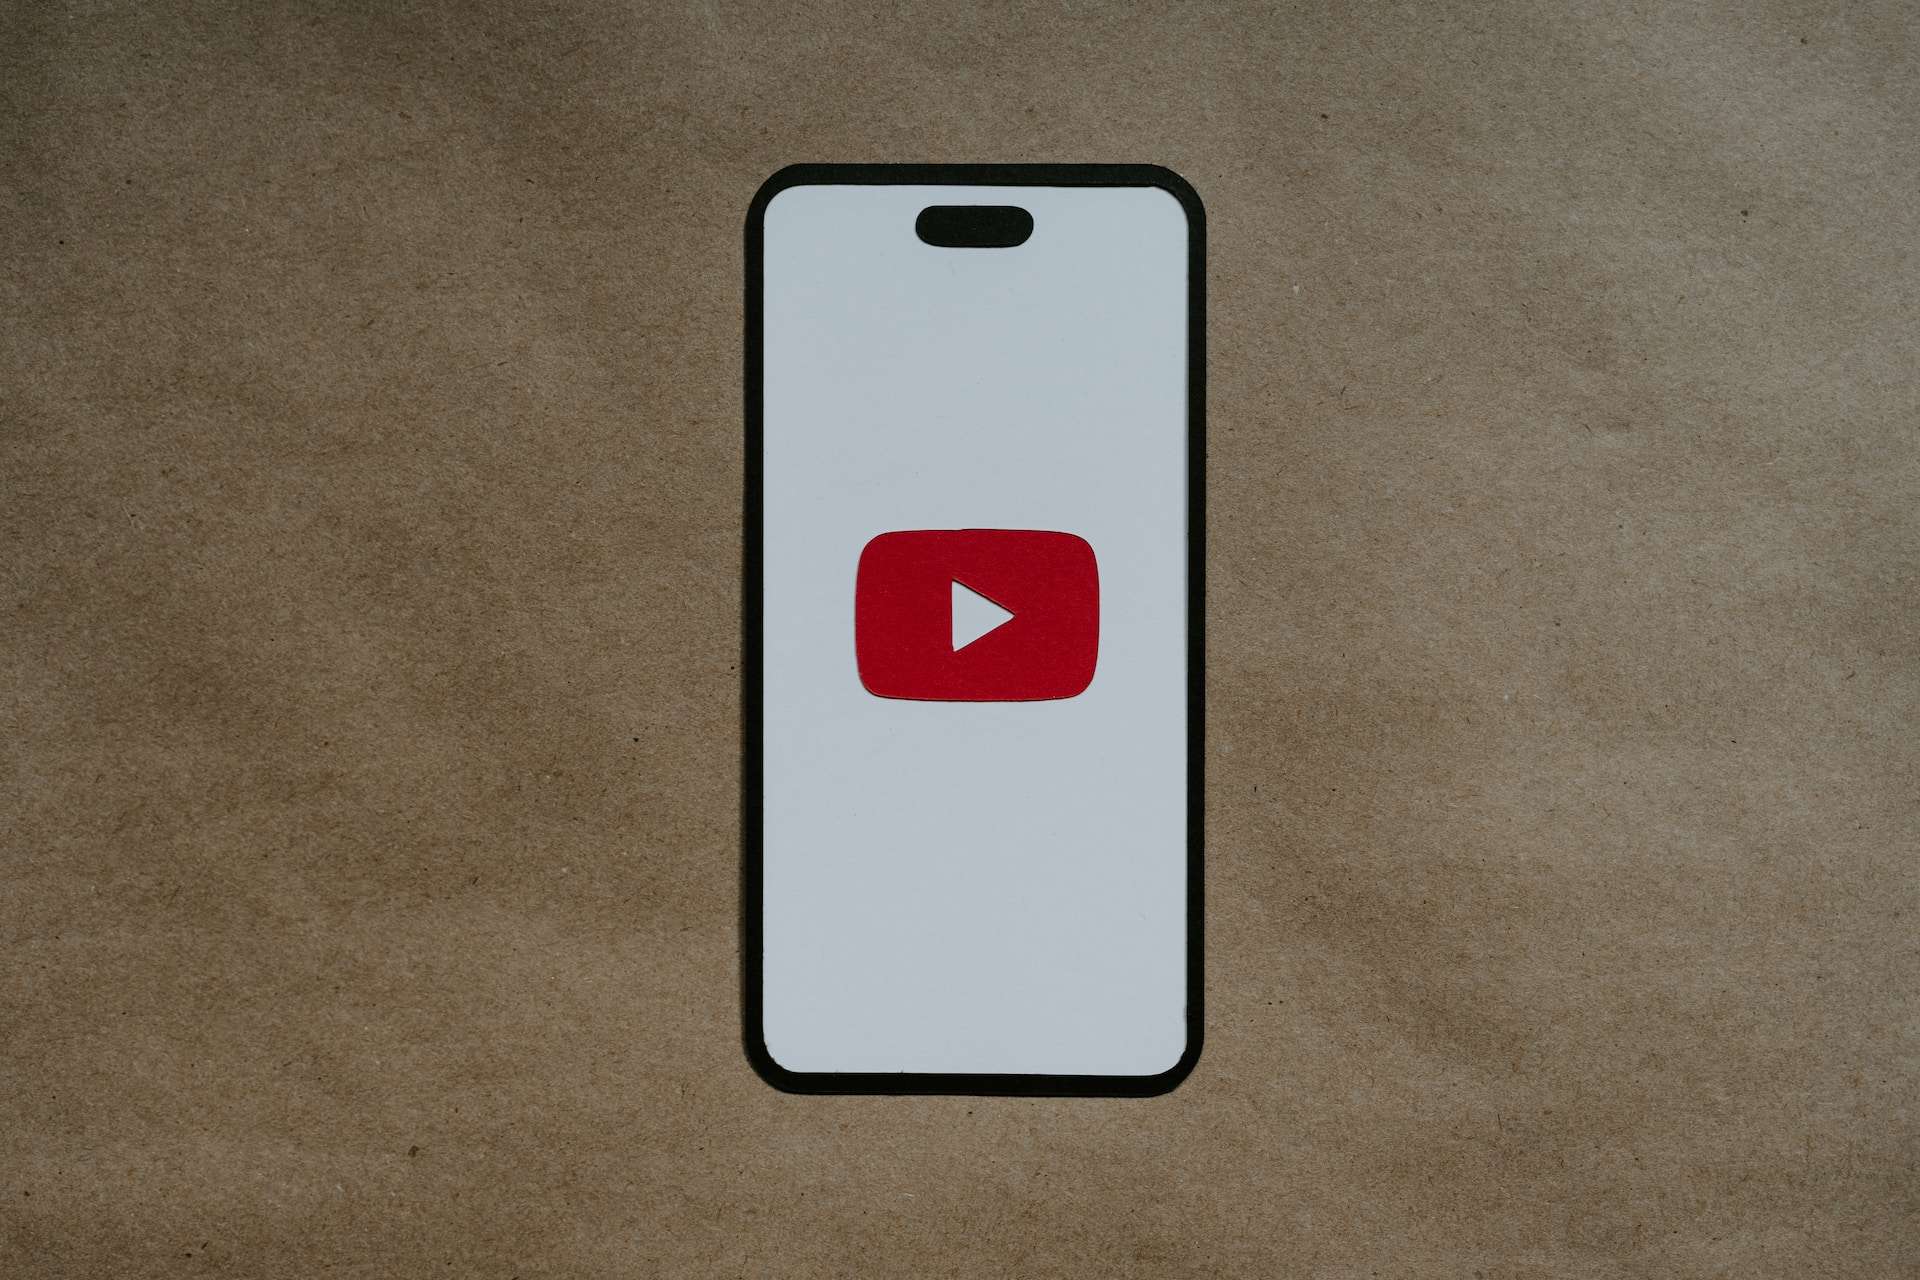 How to Make a YouTube Channel on iPhone